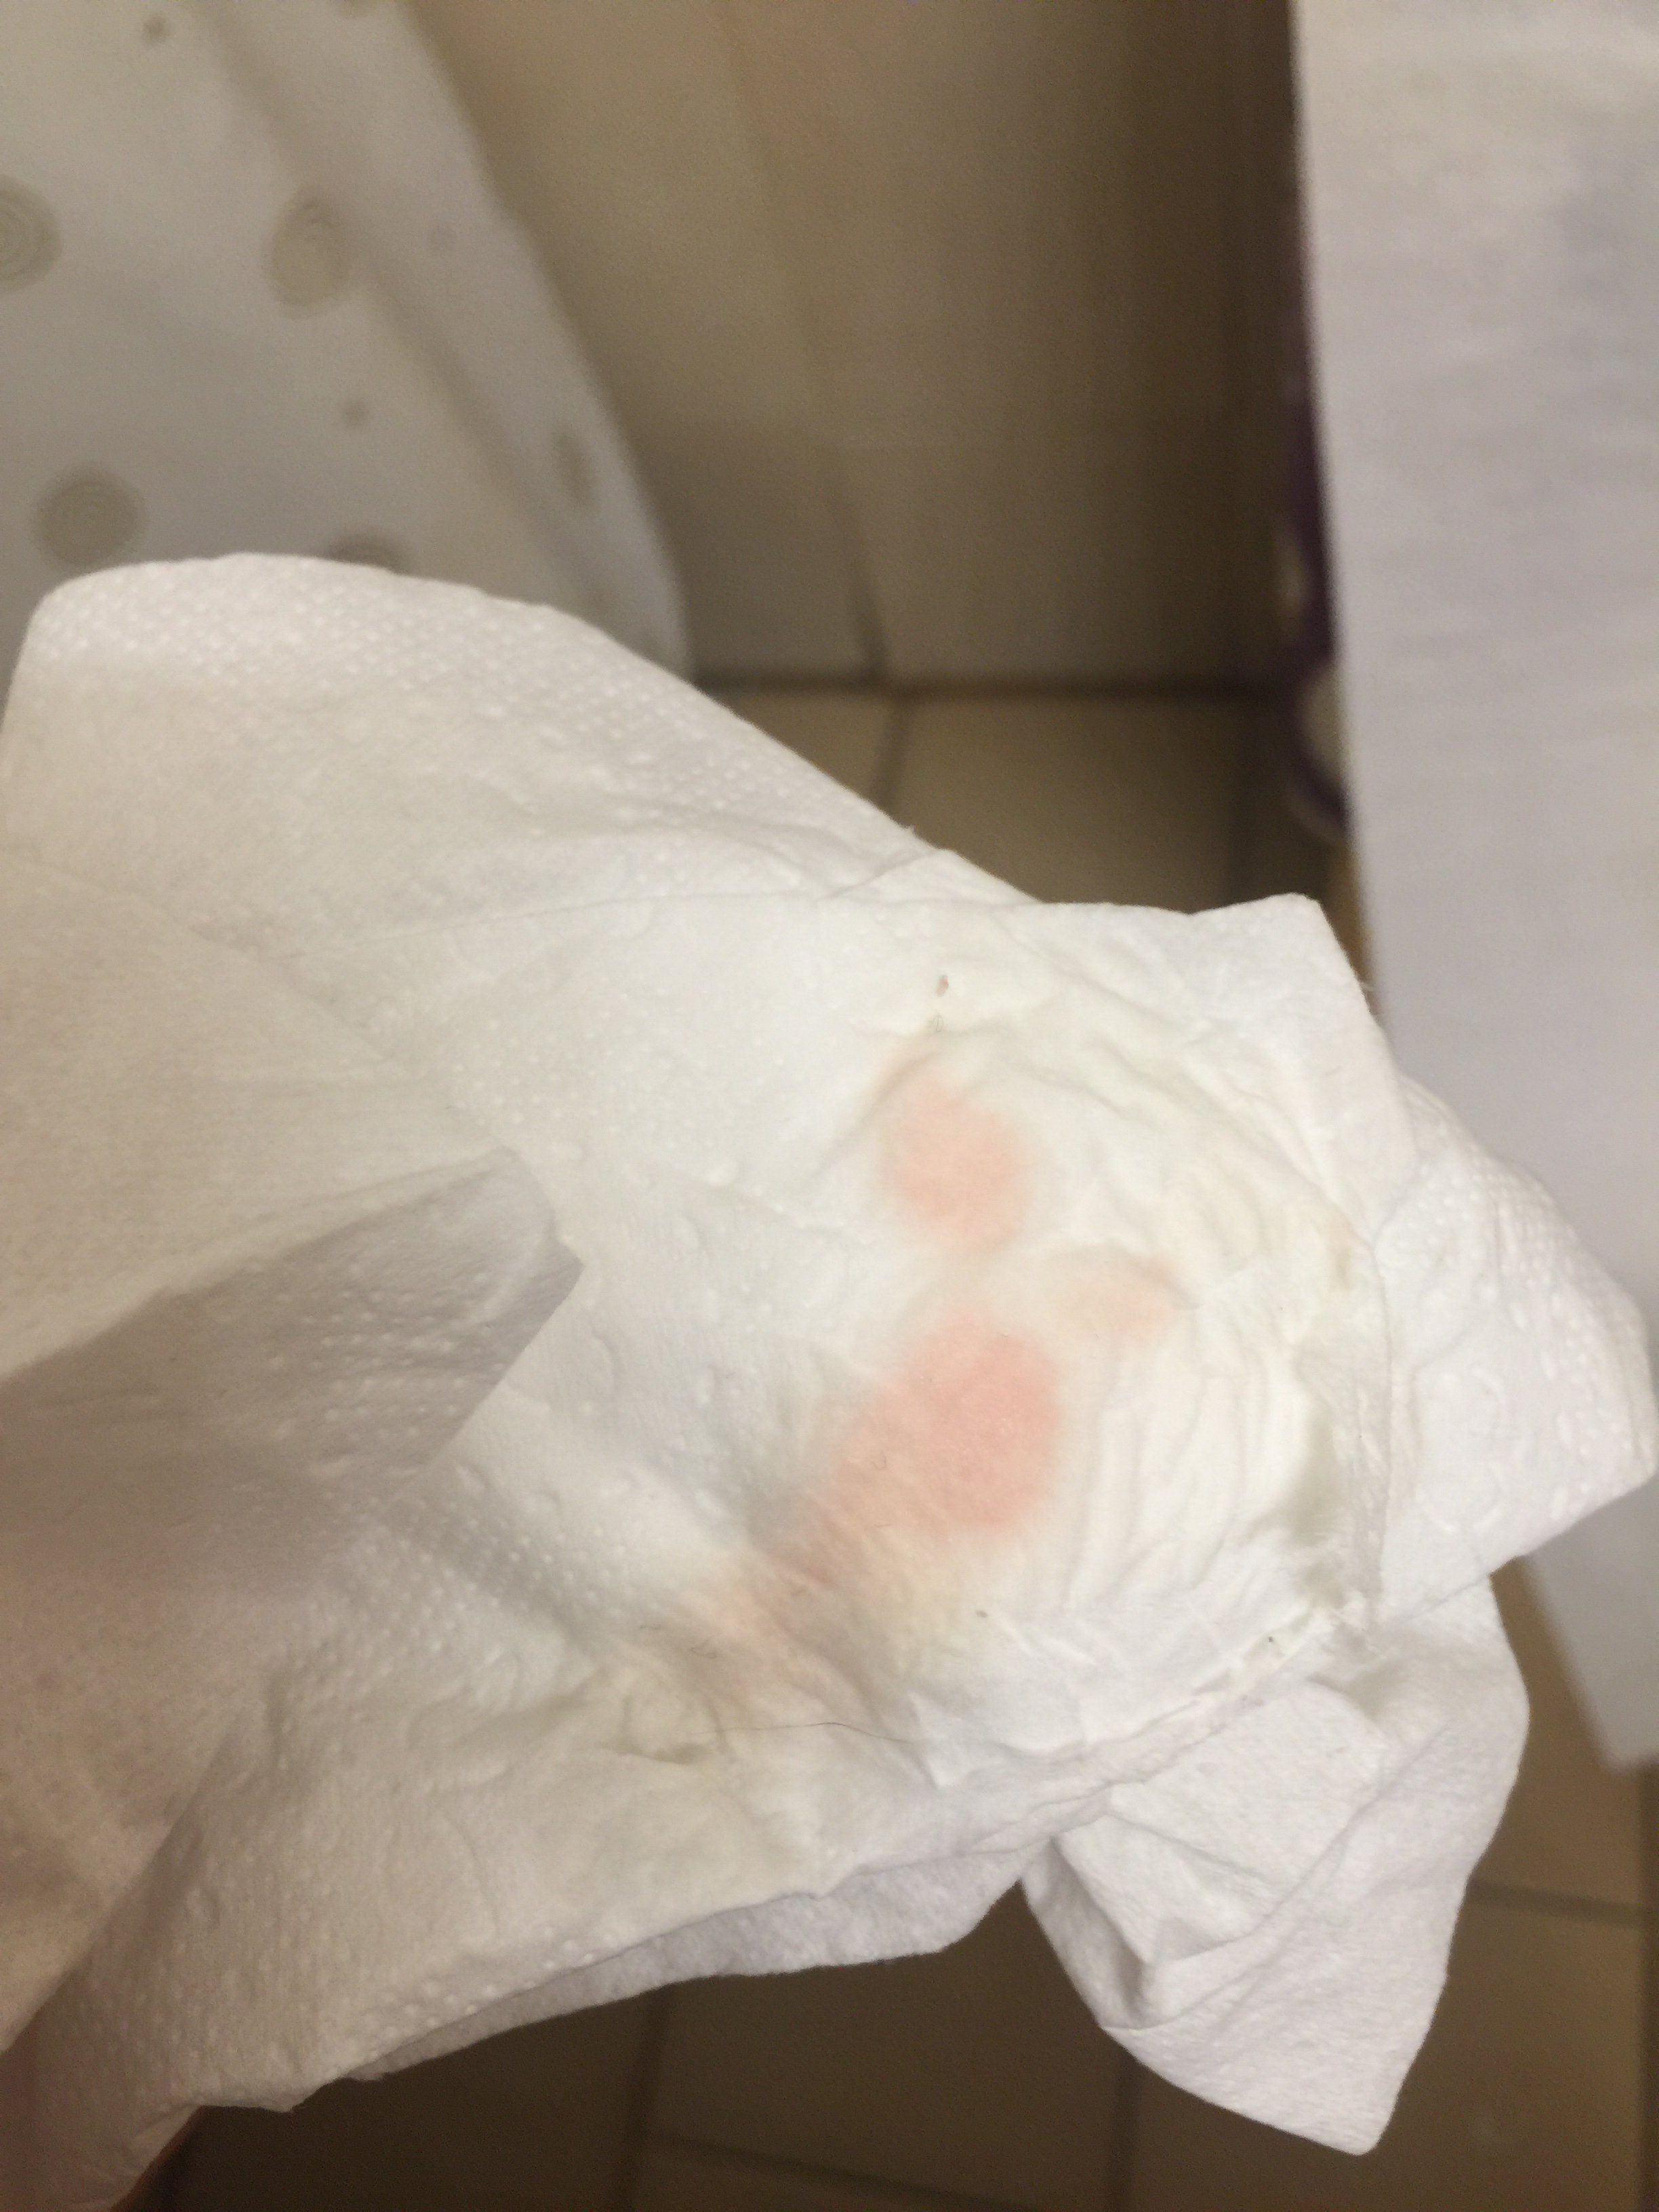 best of Pink blood on light Female after paper peeing tissue seeing